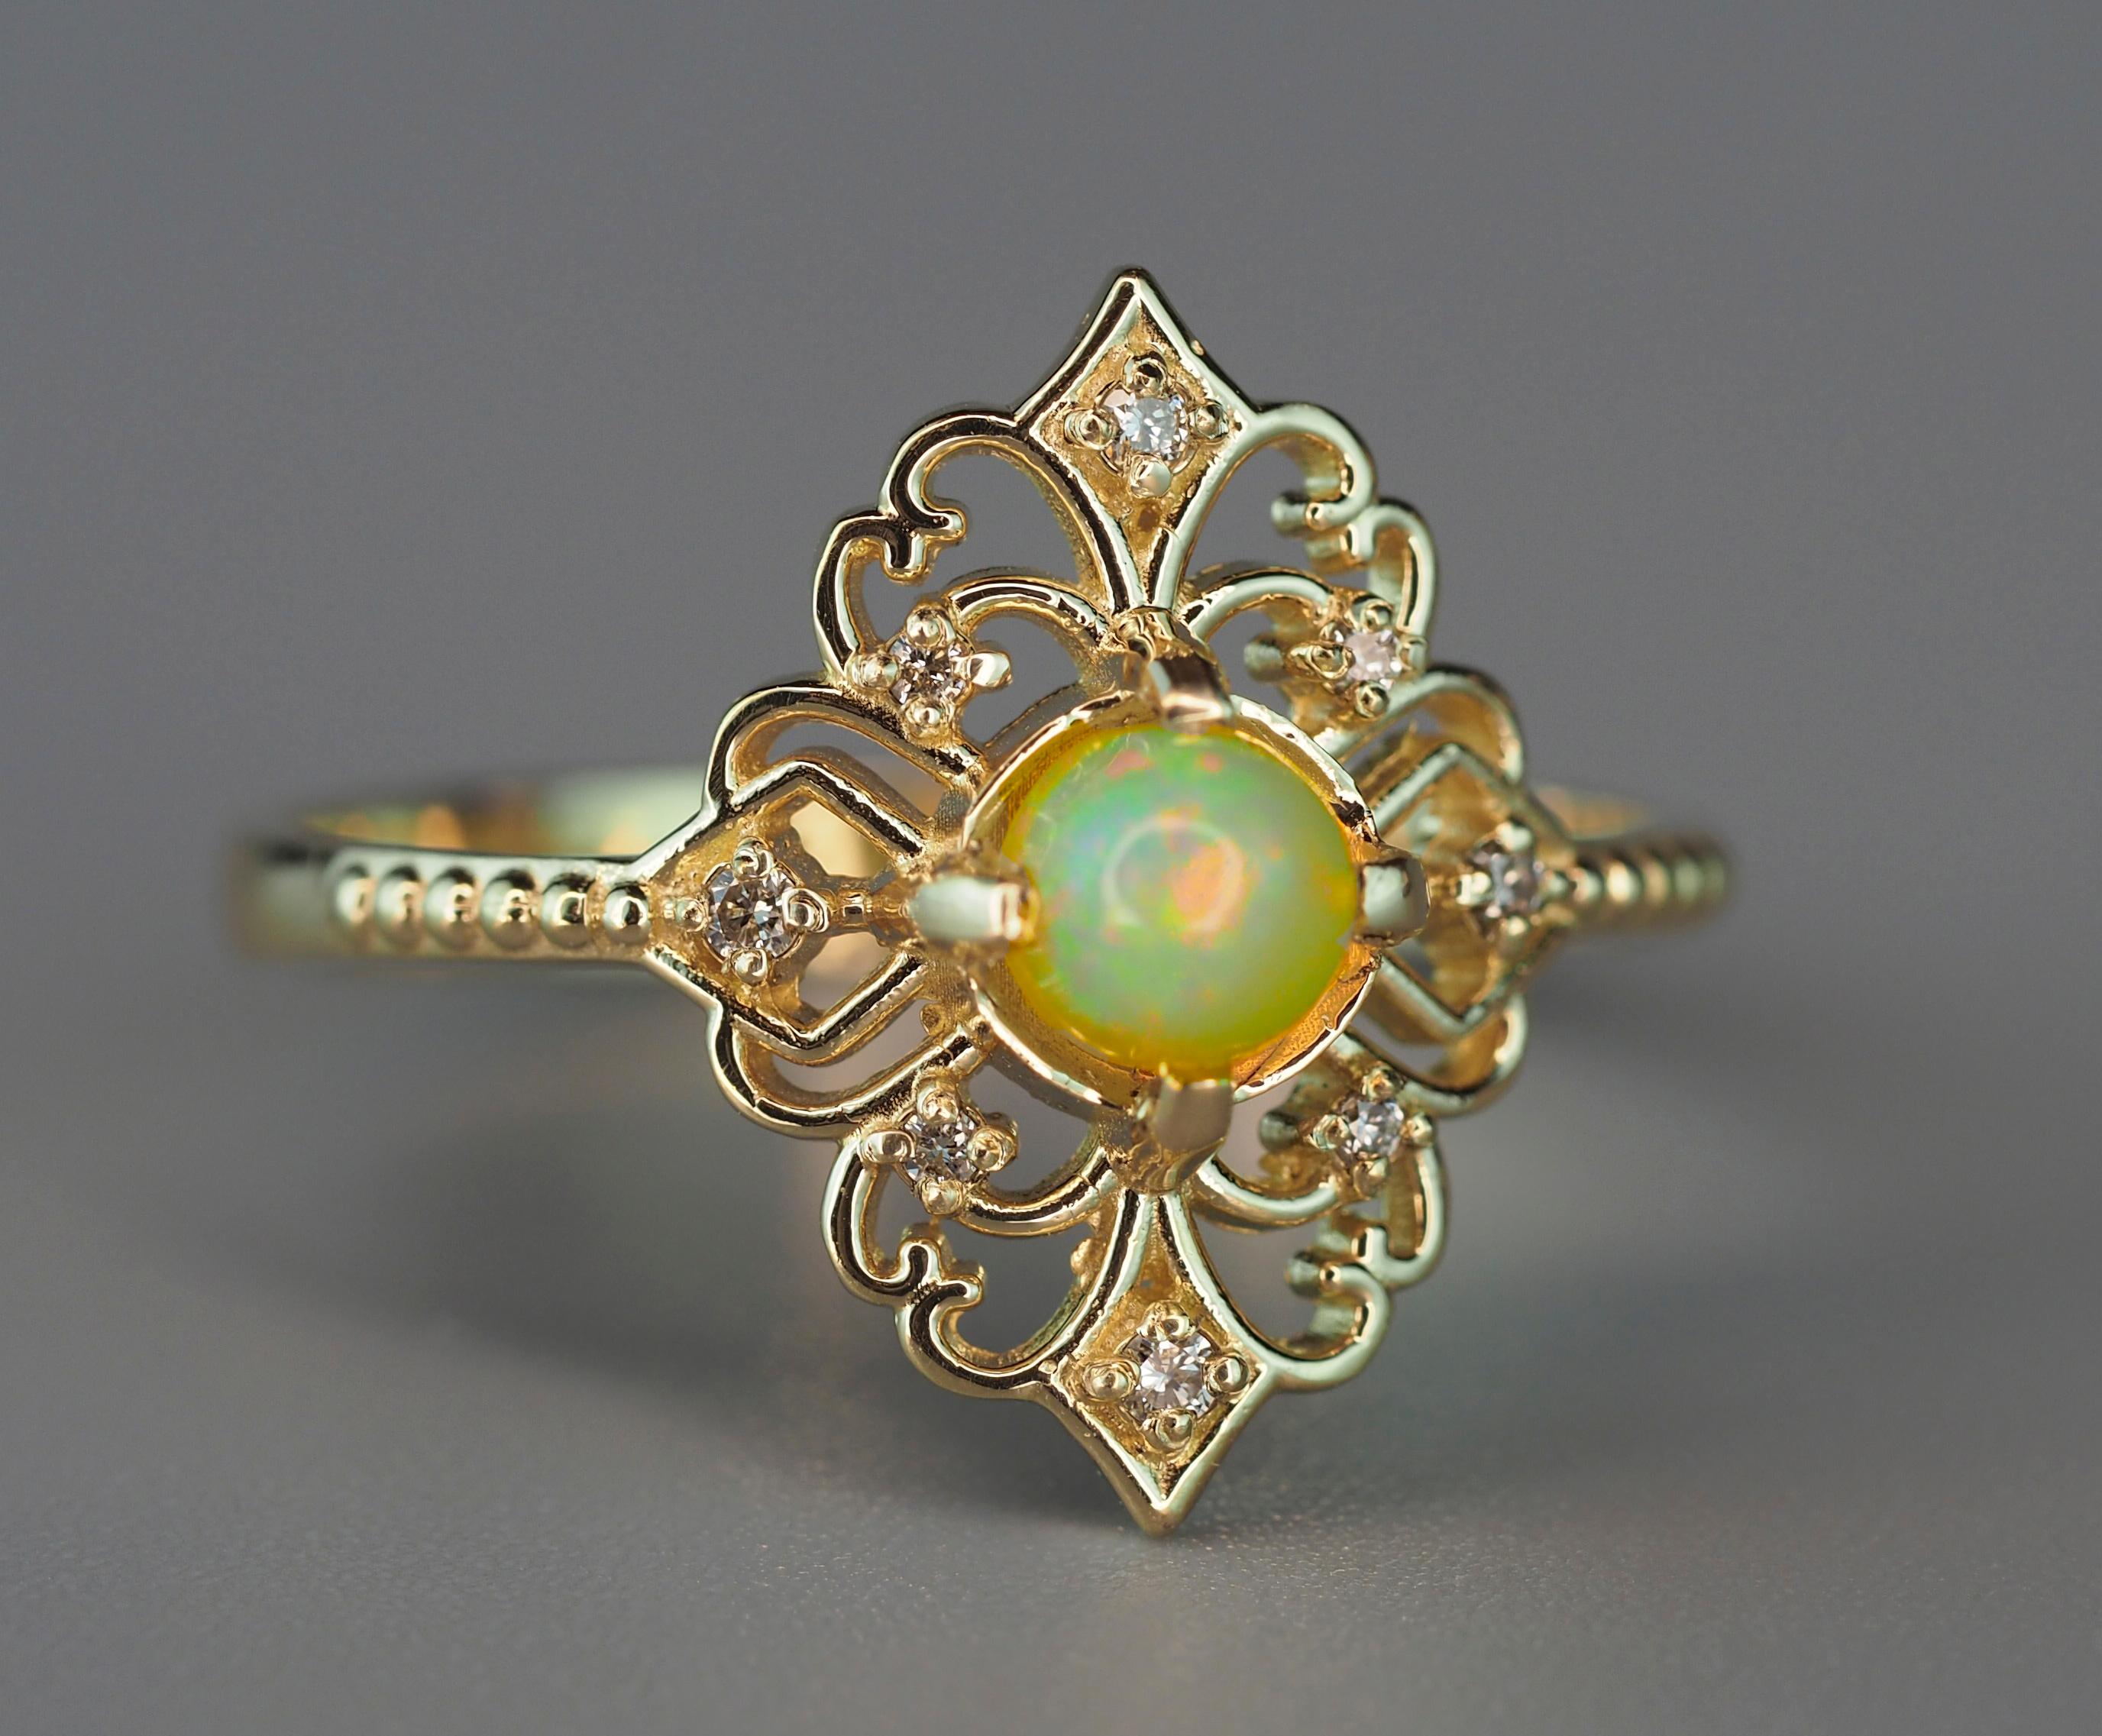 For Sale:  14k Gold Ring with Opal and Diamonds 4